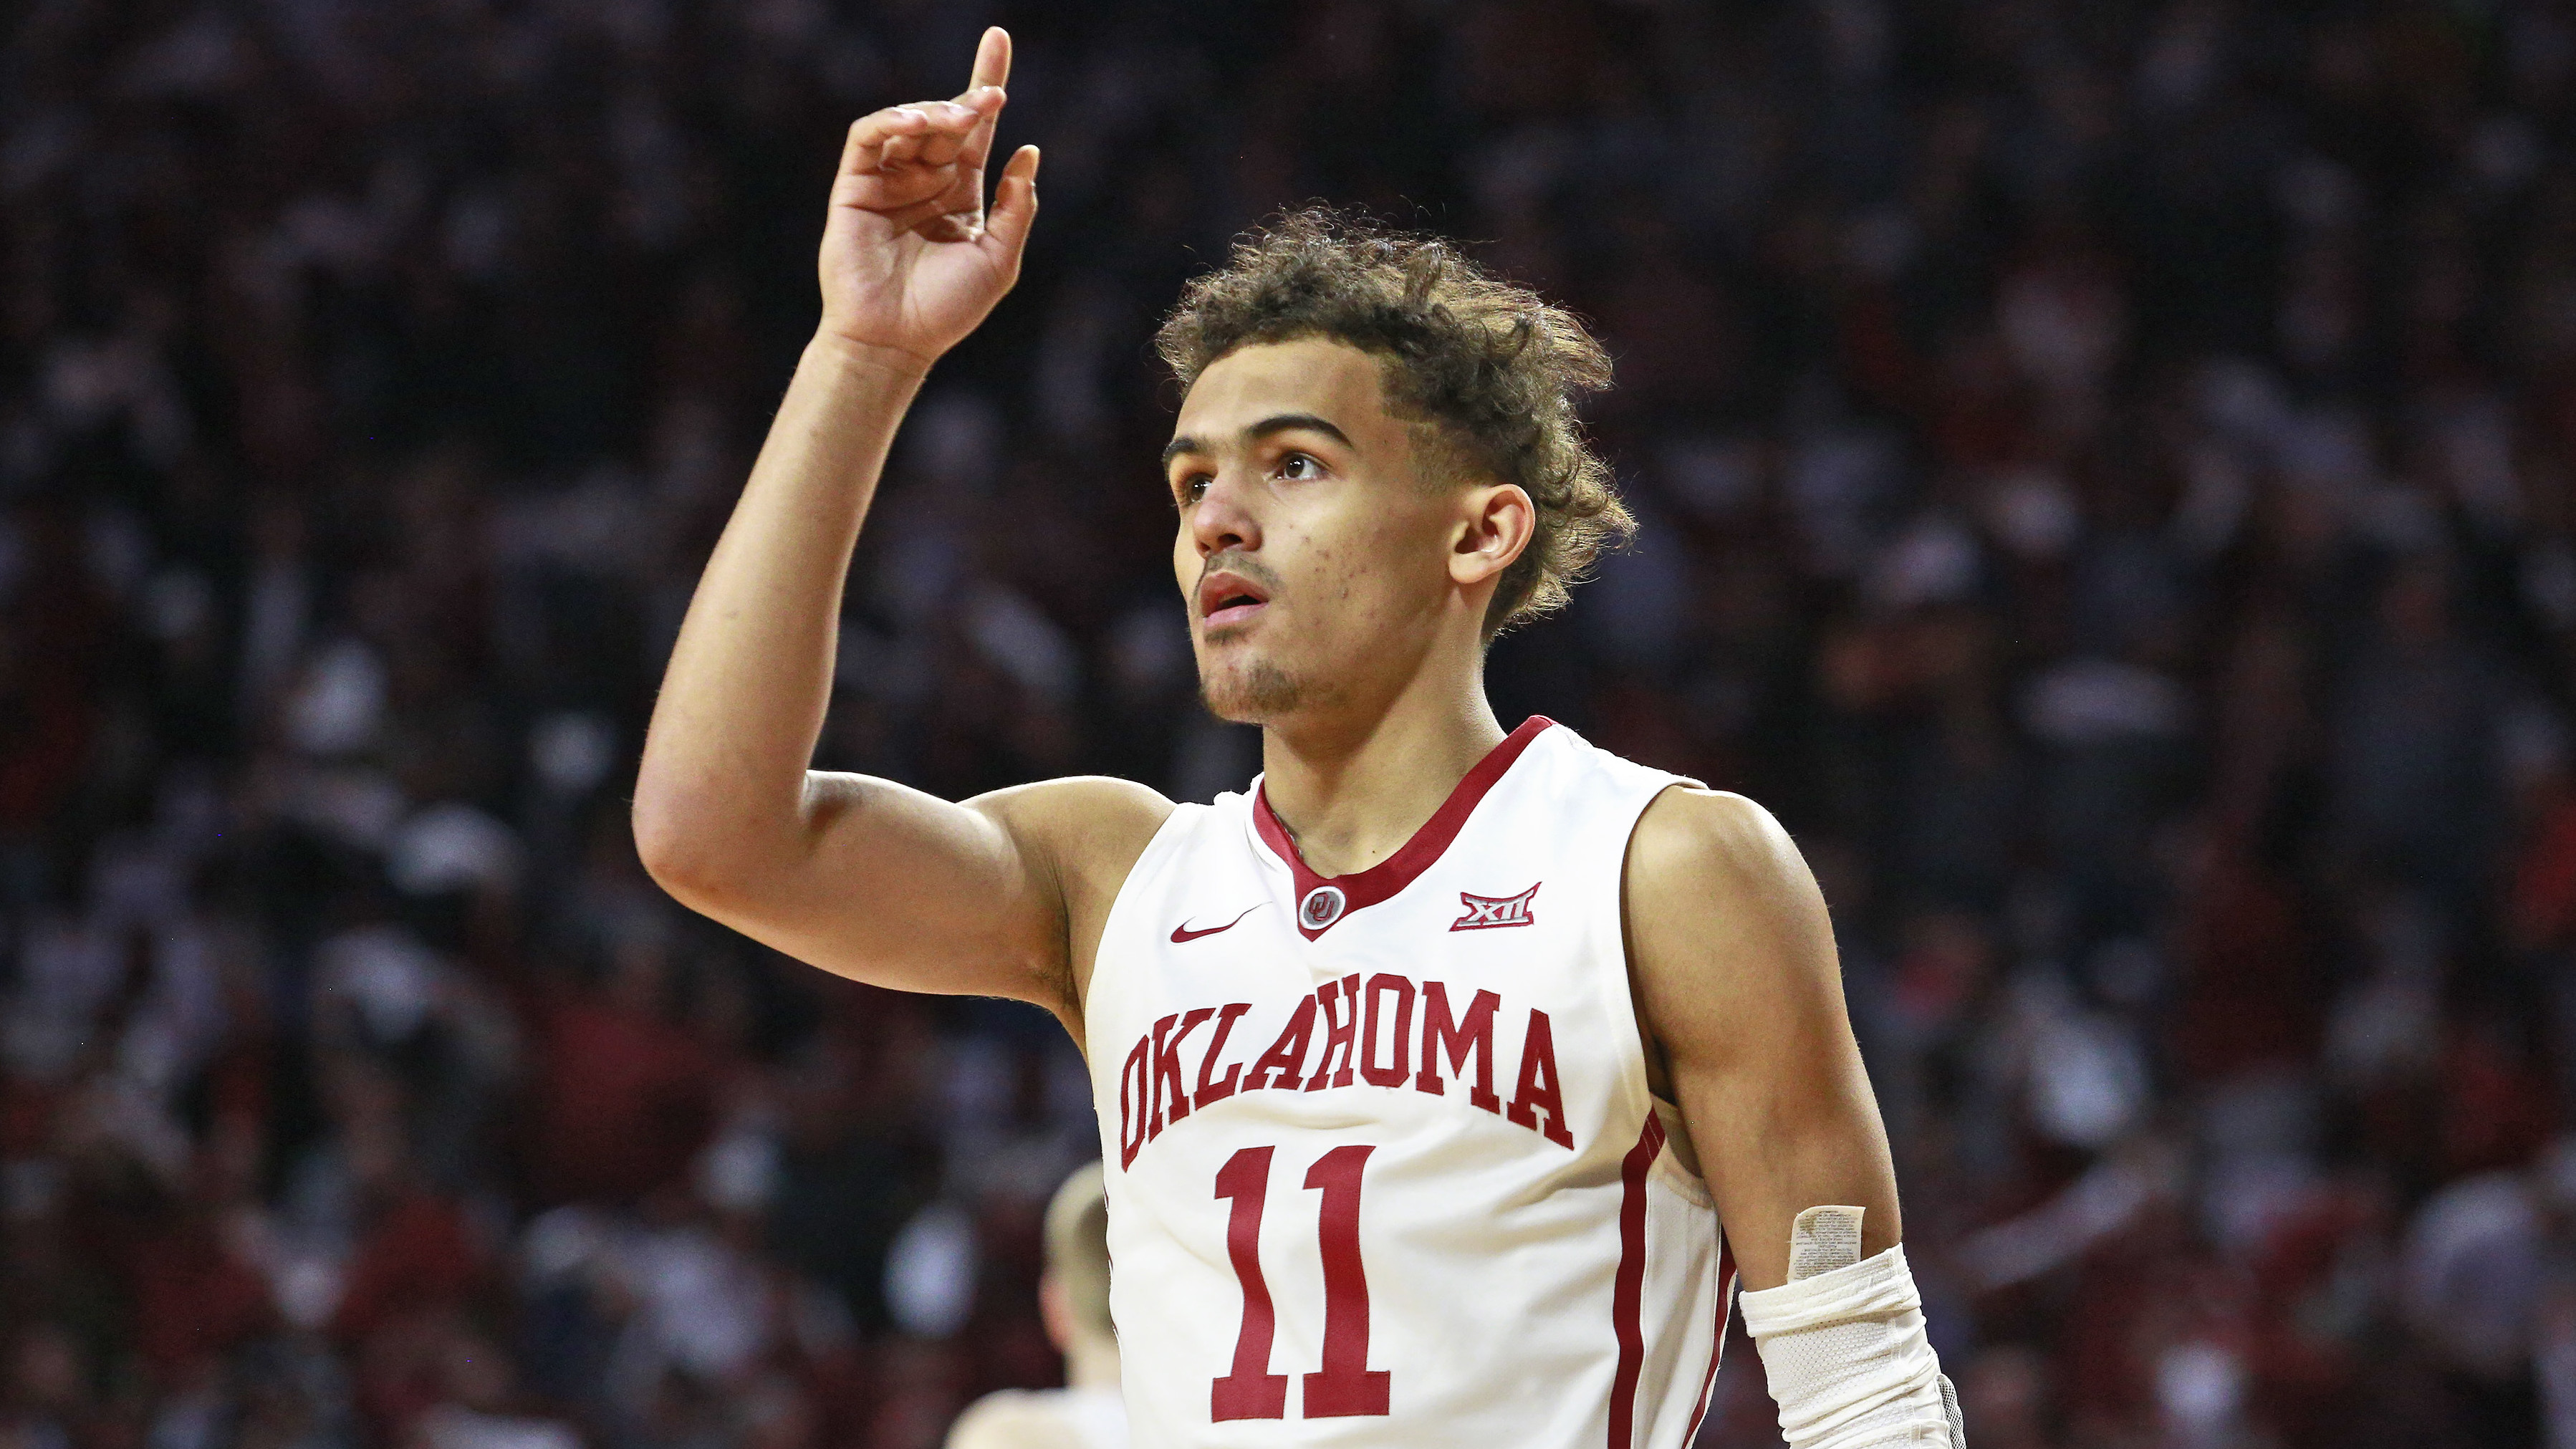 Trae Young at the University of Oklahoma